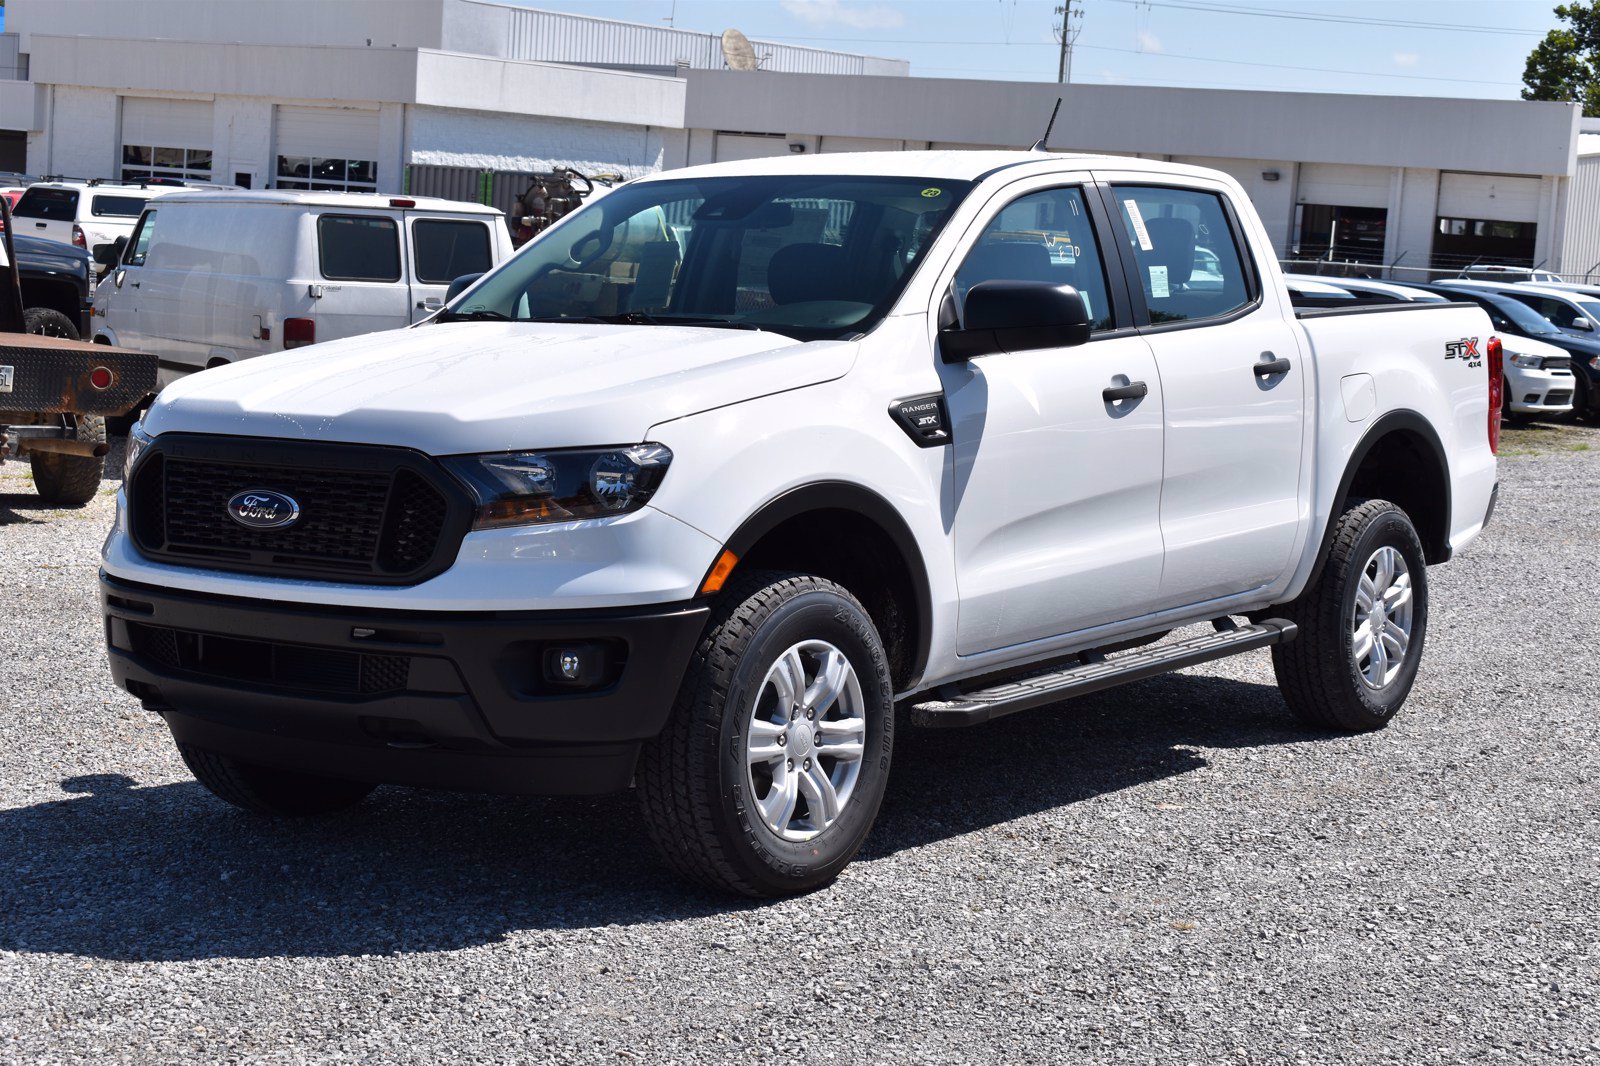 New 2020 Ford Ranger STX 4WD Crew Cab Crew Cab Pickup in Fayetteville #